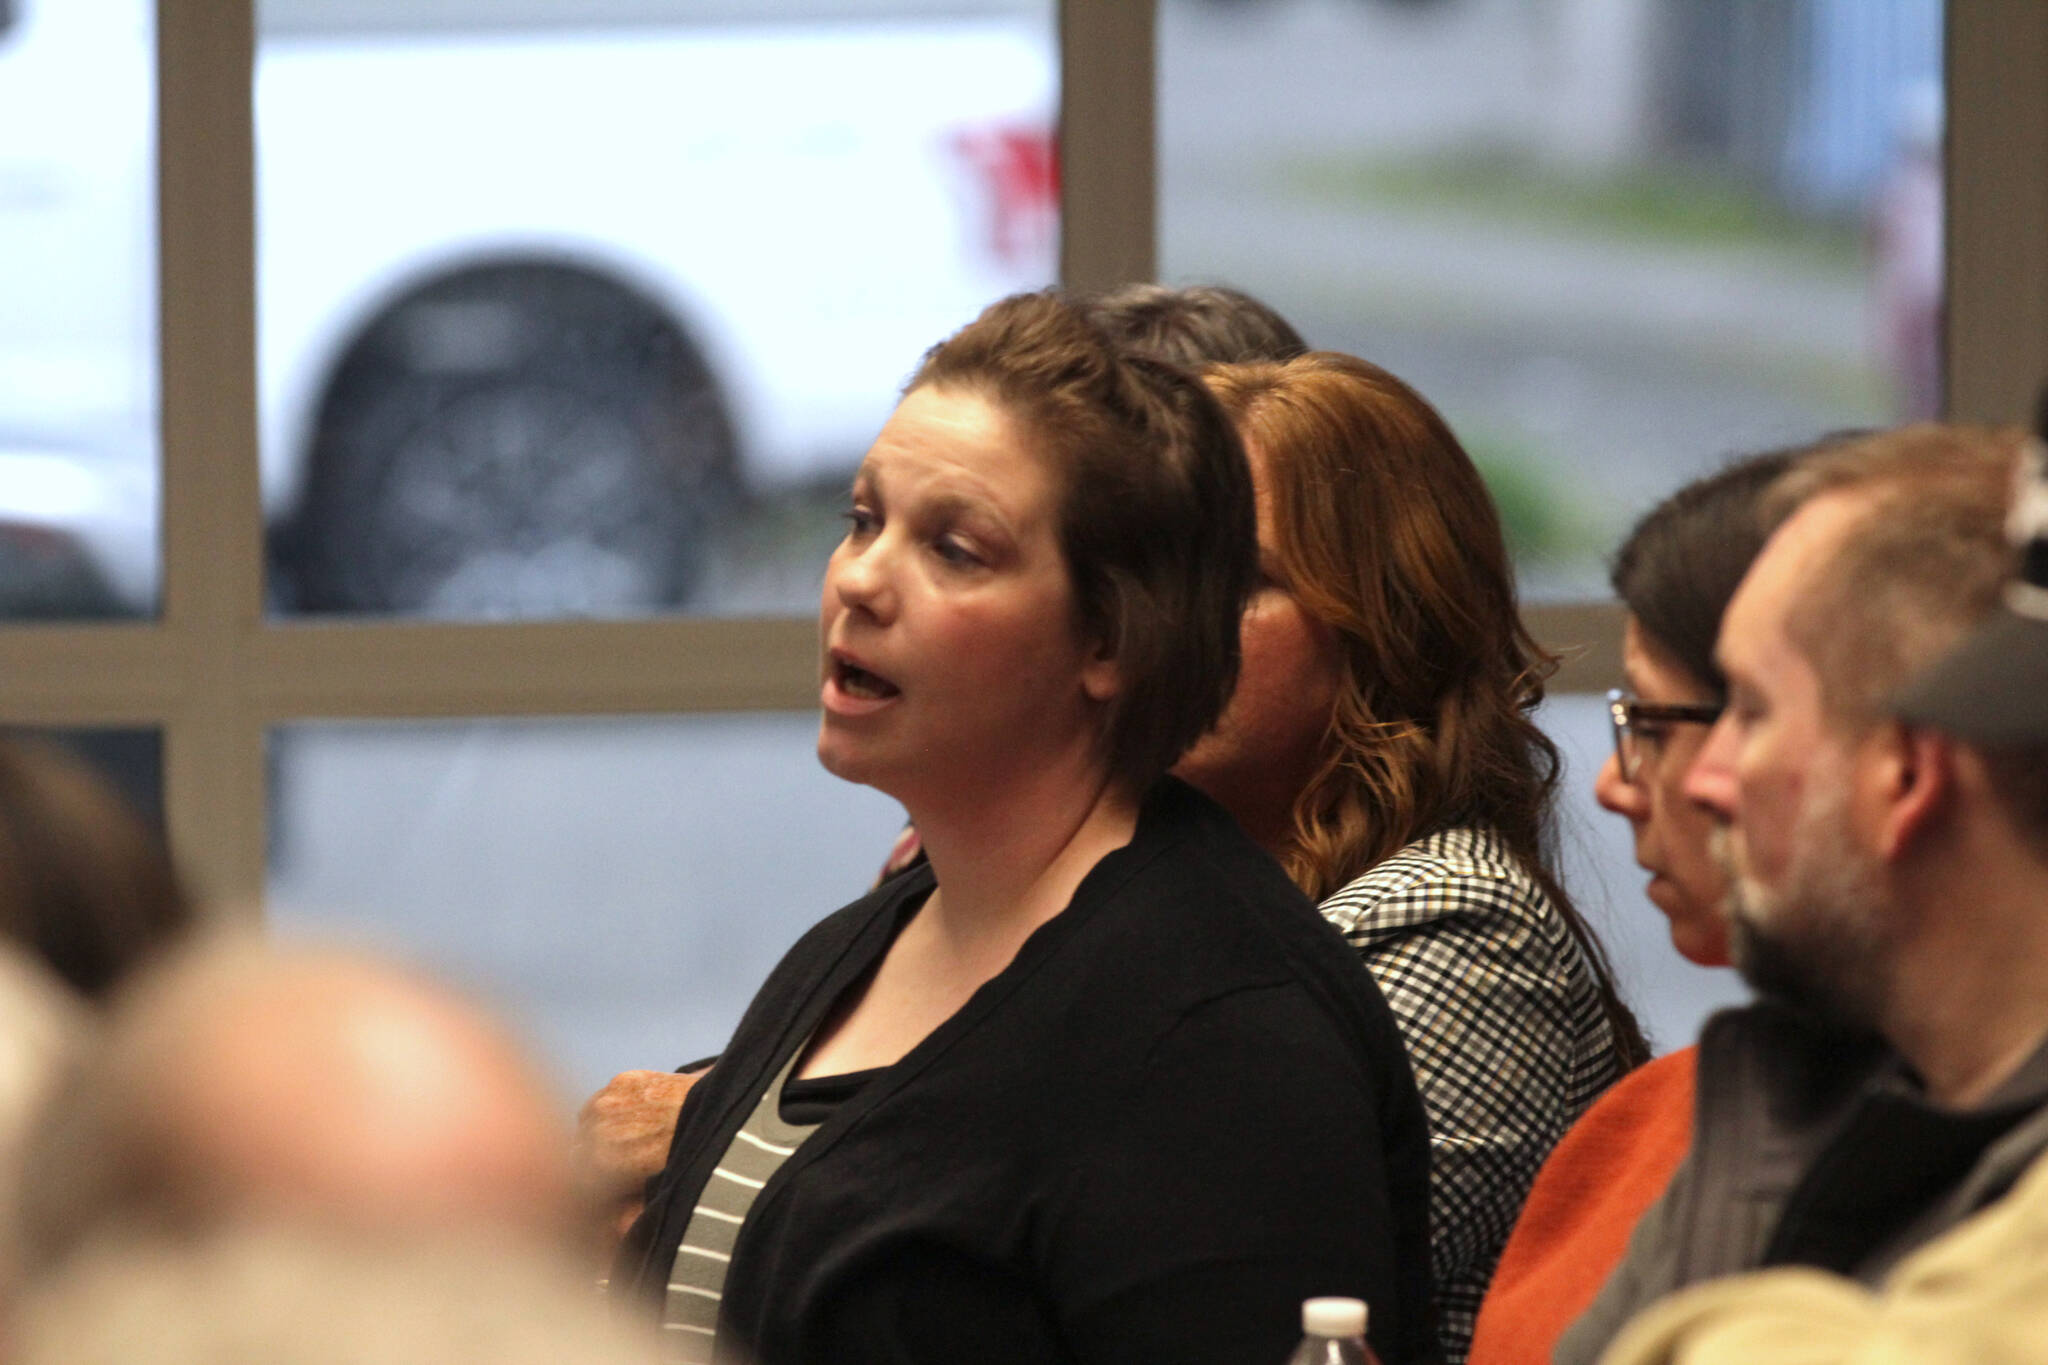 Katie Judd asks a question to leadership of the local fire departments during a meeting about the proposed creation of a regional fire authority for Central Grays Harbor on March 28. (Michael S. Lockett / The Daily World)